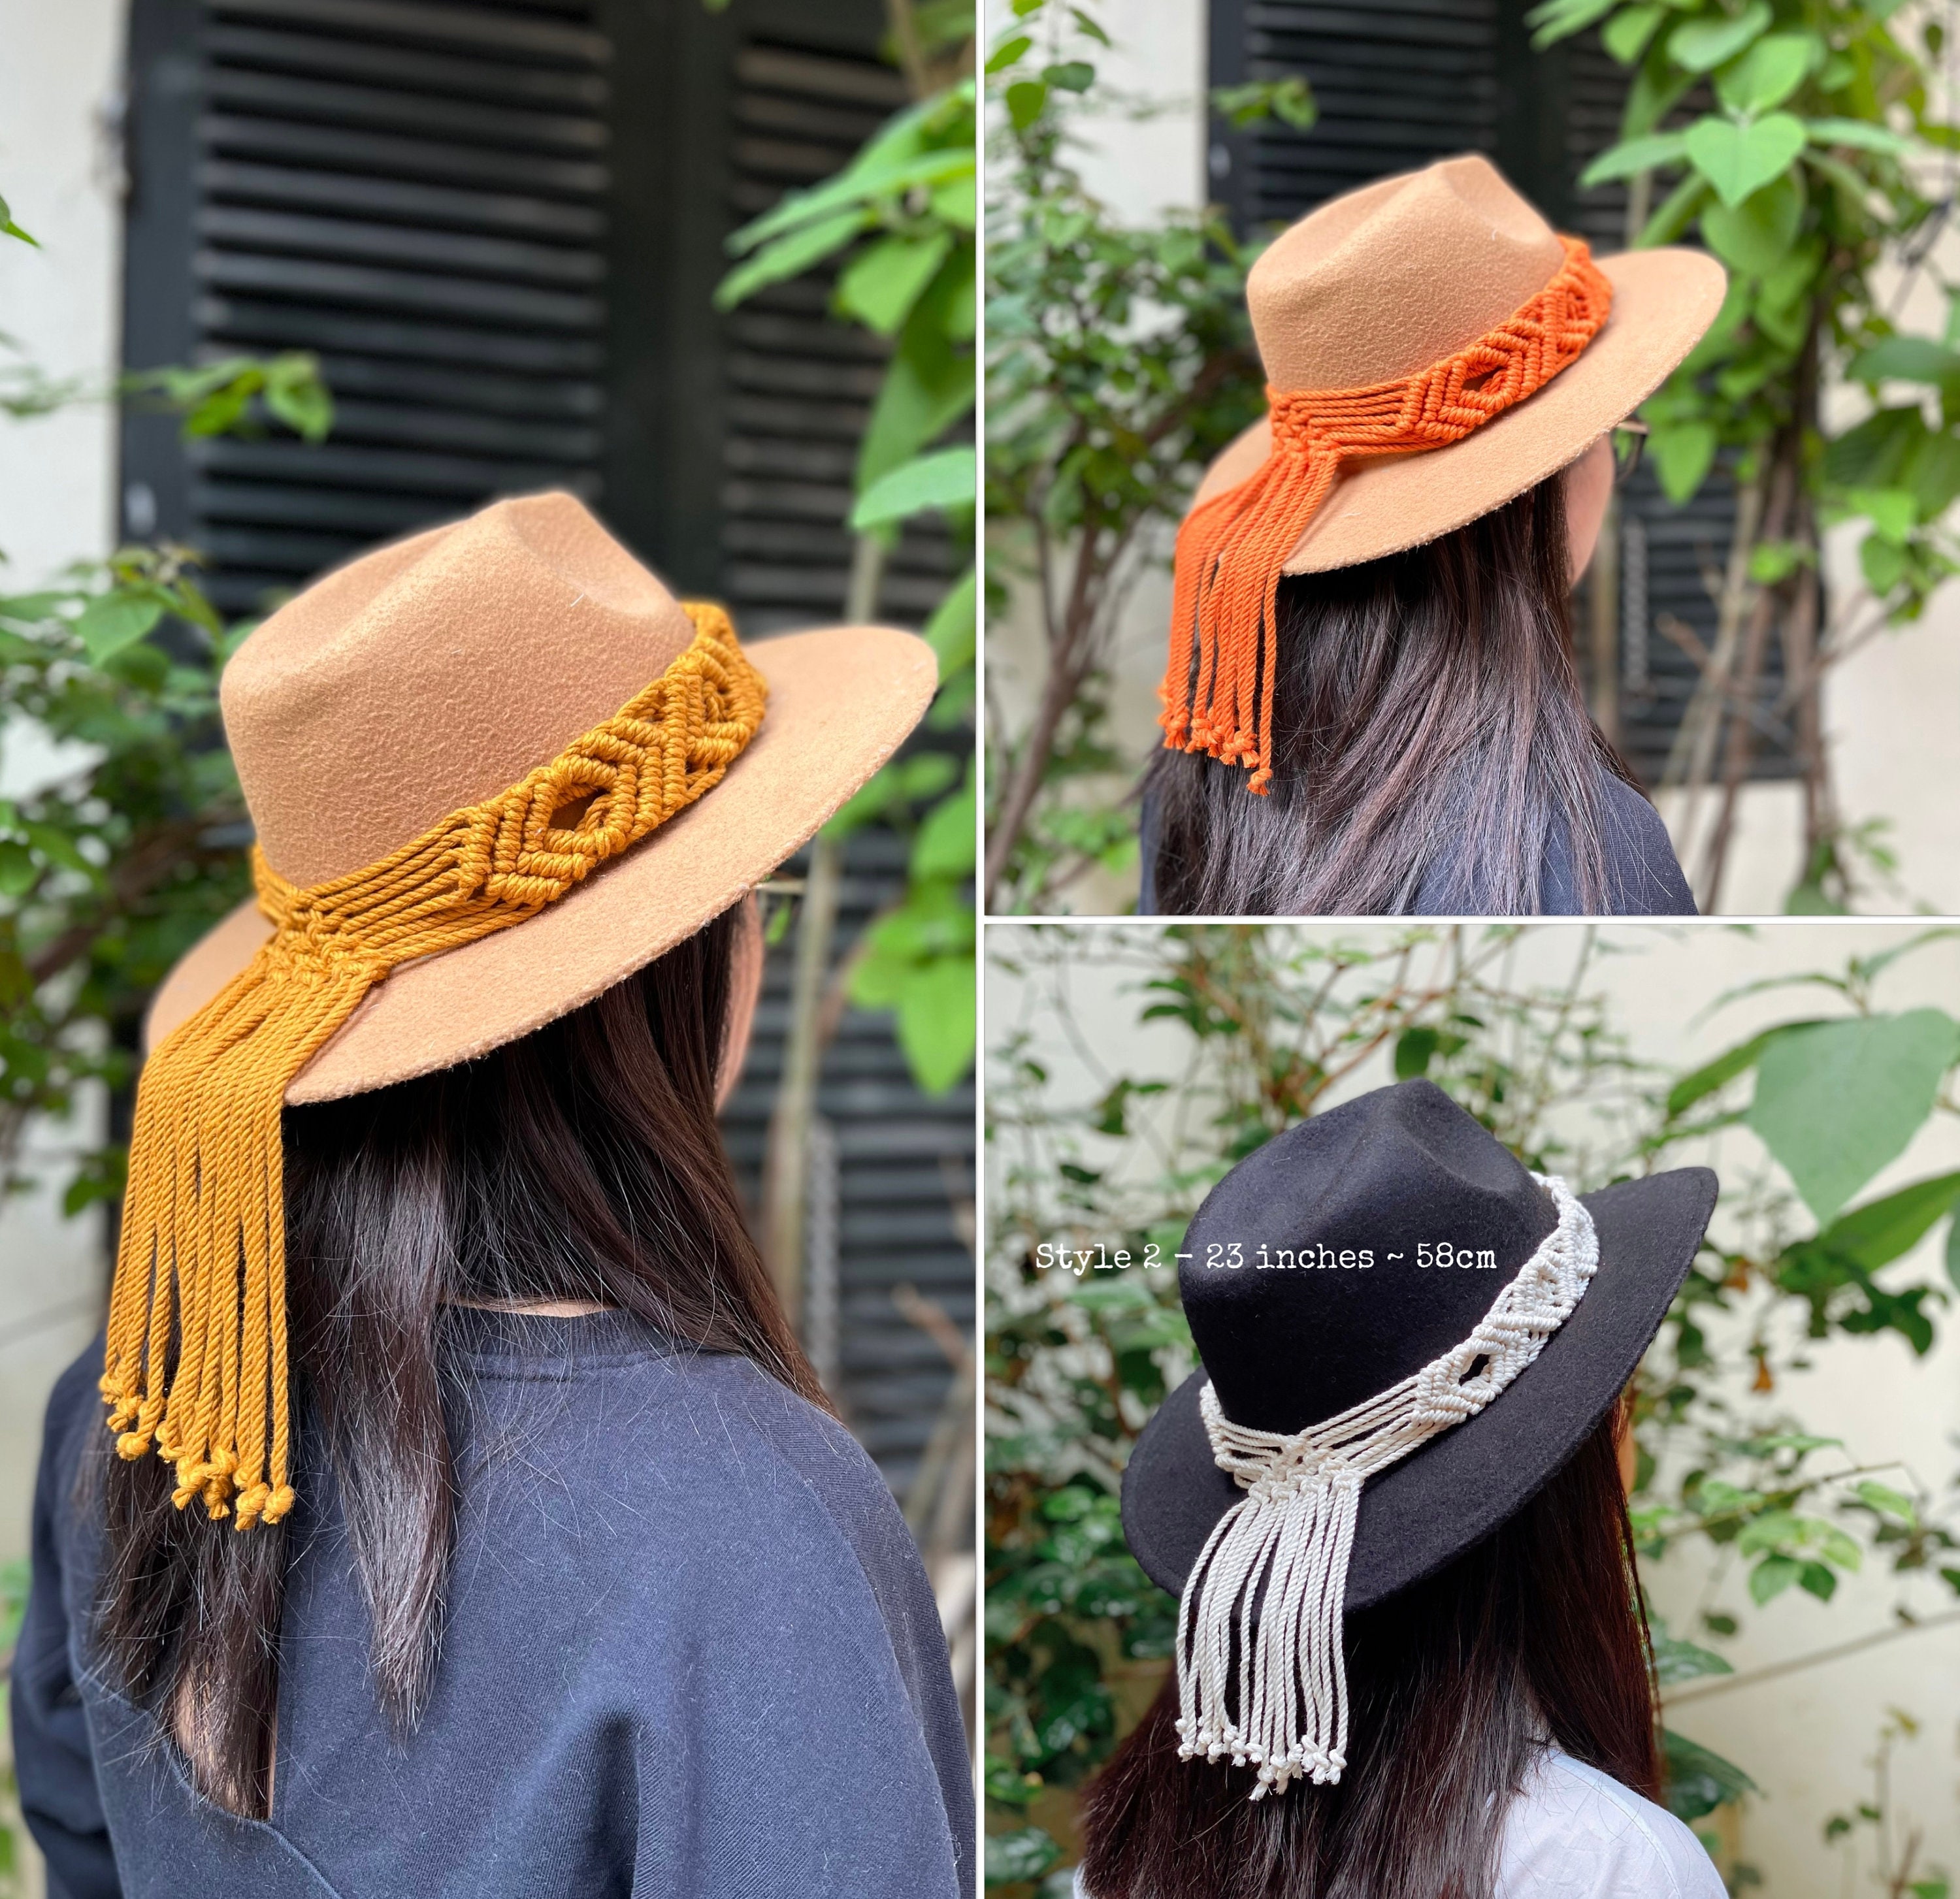 Boho Macrame Hat Bands, Handmade Hat Bands, Hat Accessories, Hatband for Women, Festival Accessory, Unique Gift for Her, Gift for Hat Lover